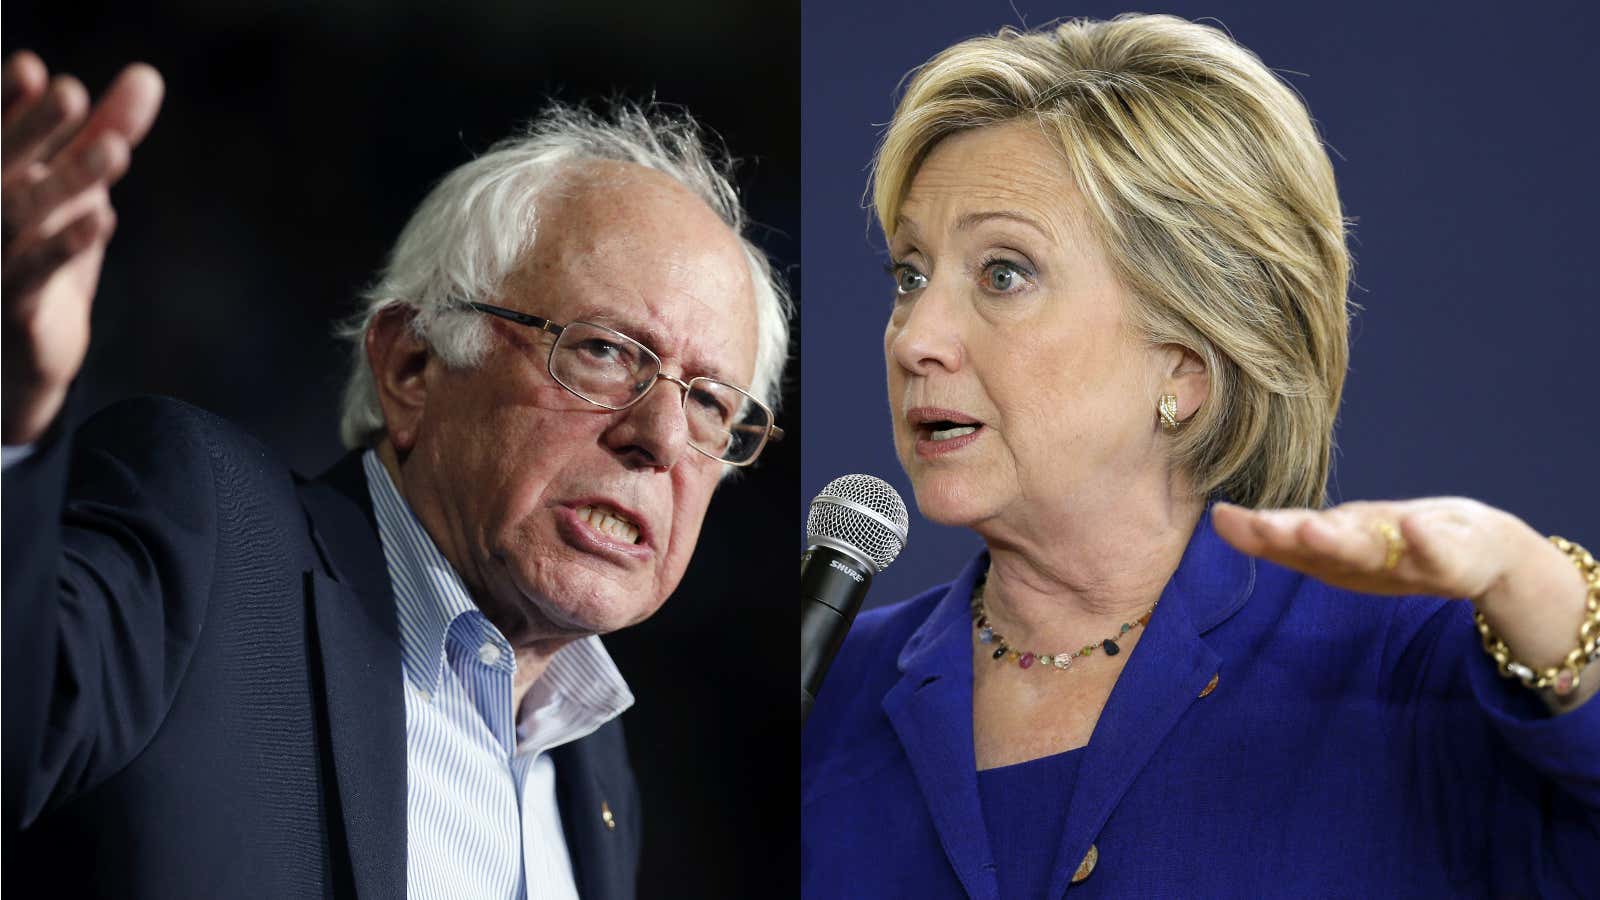 Leading presidential candidates Senator Bernie Sanders and former Secretary of State Hillary Clinton will face off tonight.